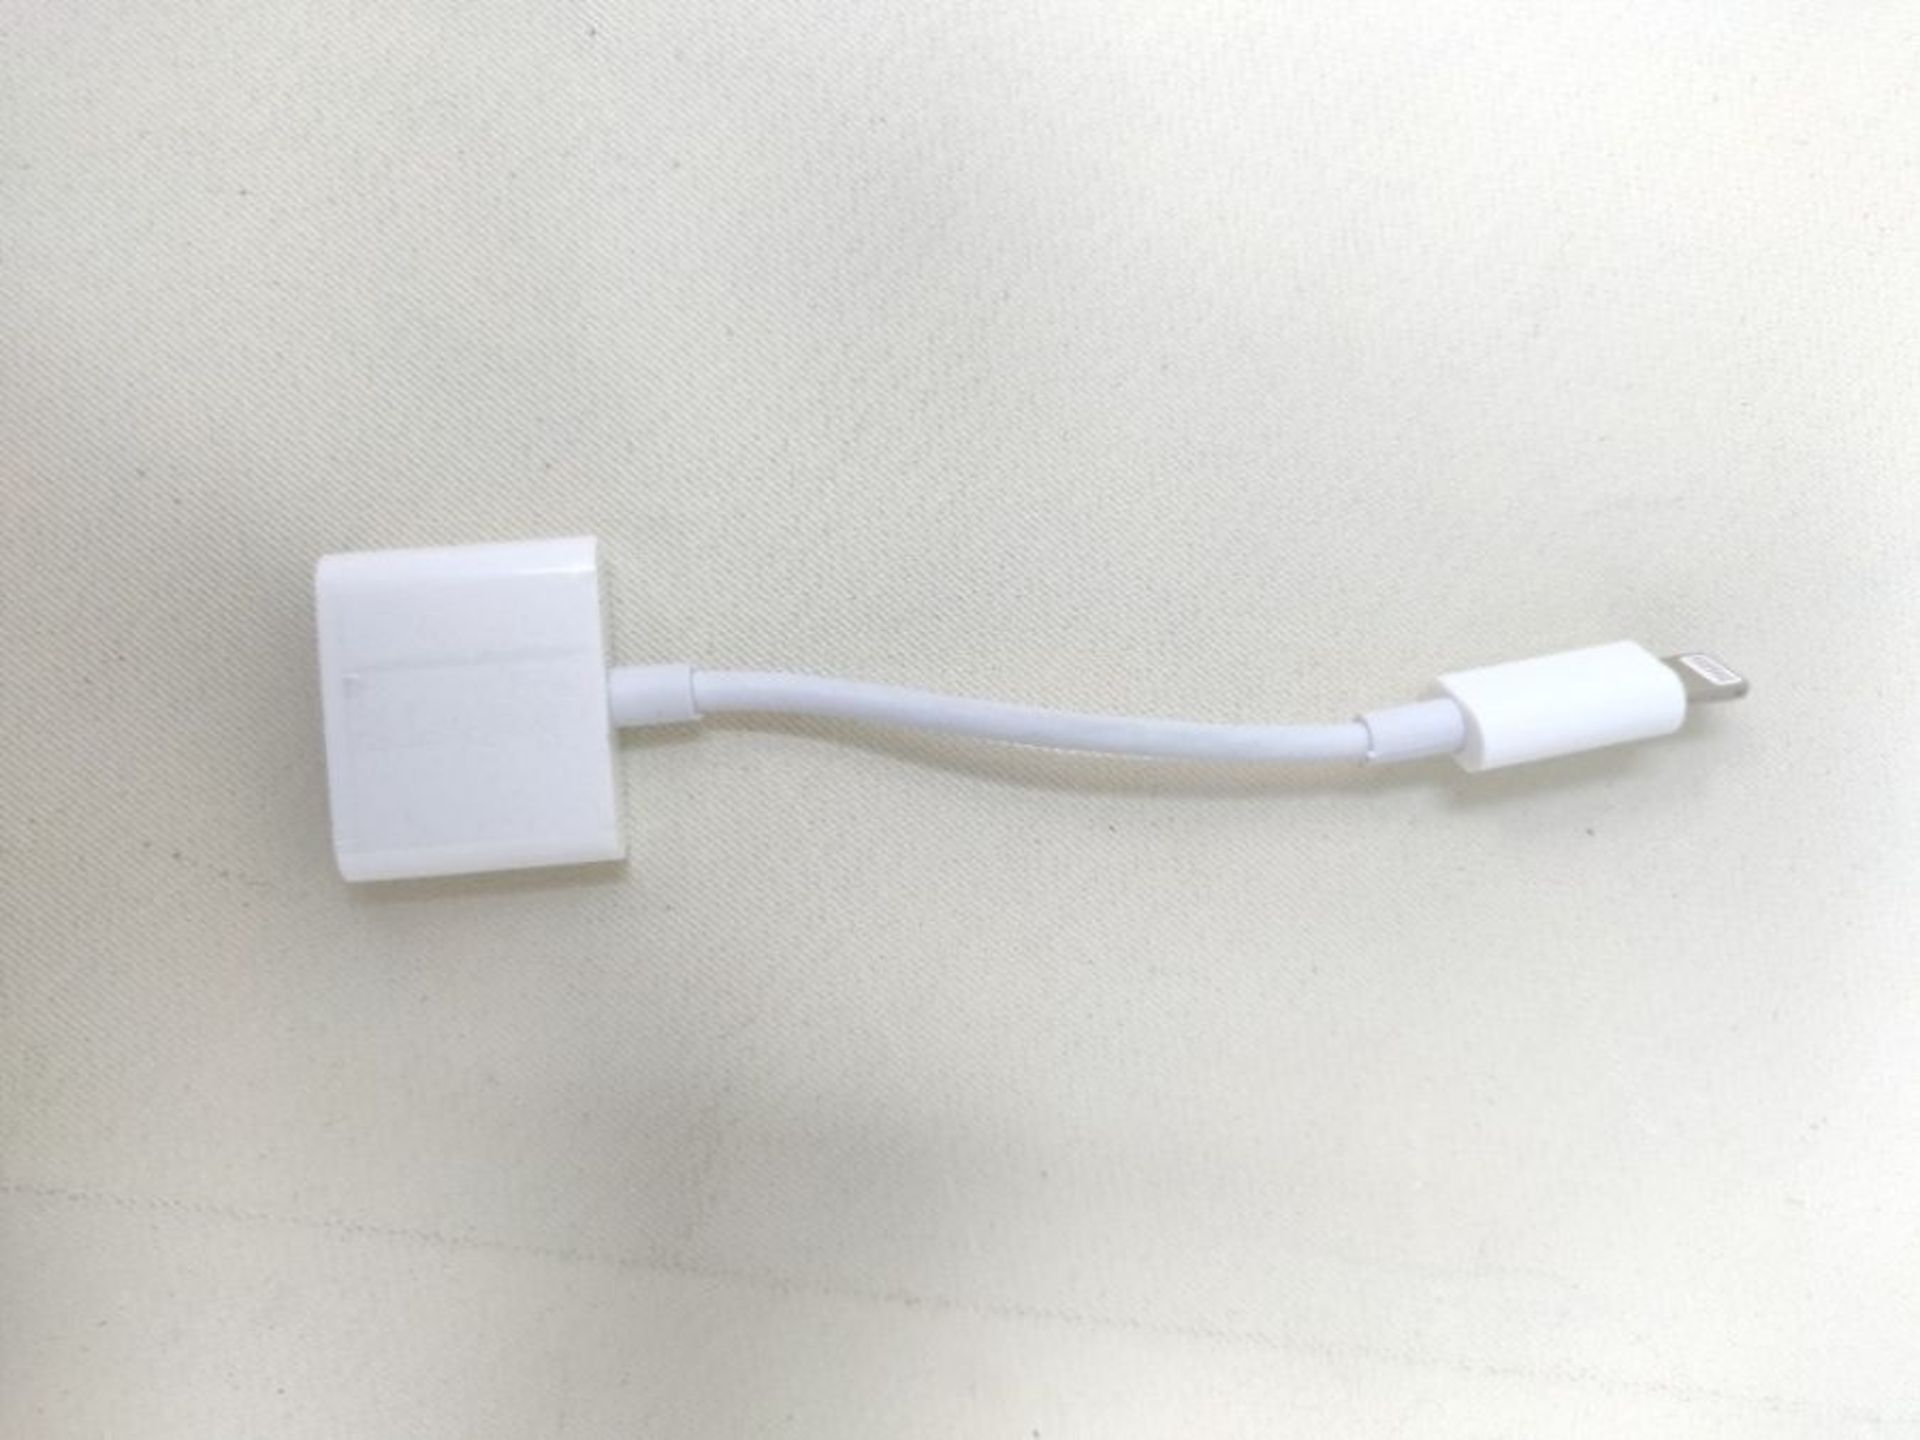 Tec-Digi Headphone Jack Adapter for iPhone Adapter Splitter Charger and Headphones for - Image 2 of 2